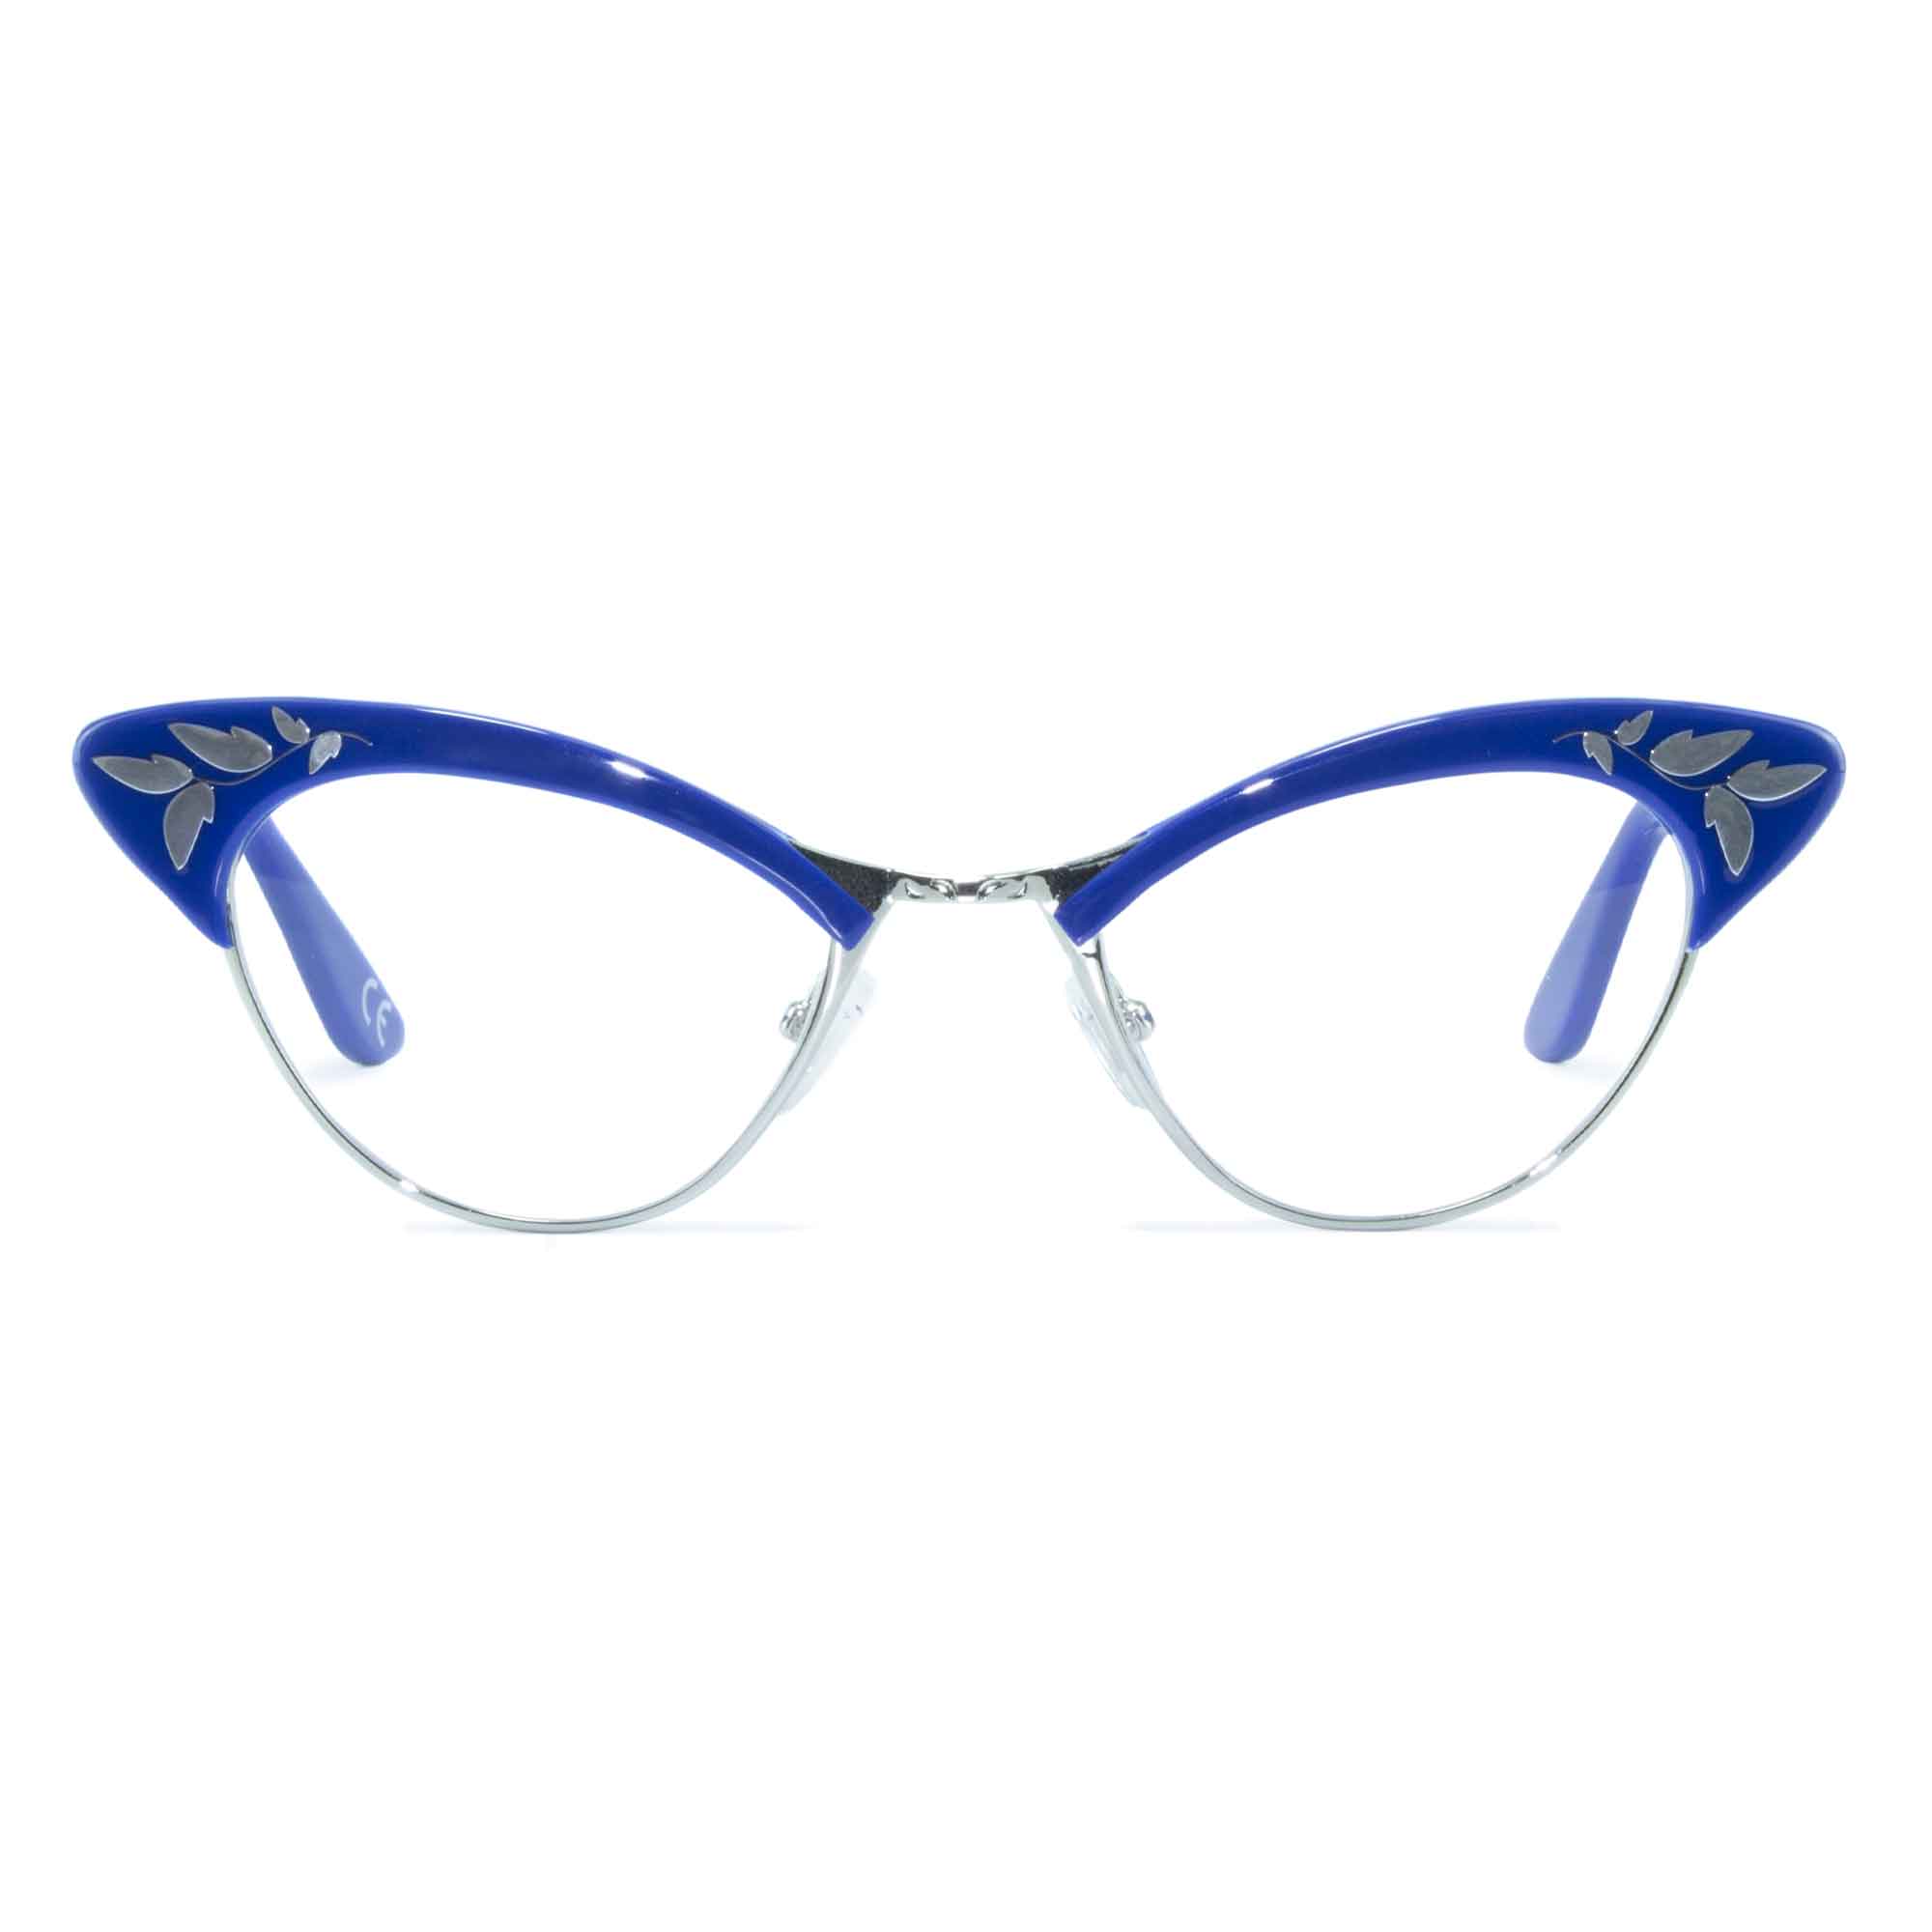 blue & gold cat eye glasses front view